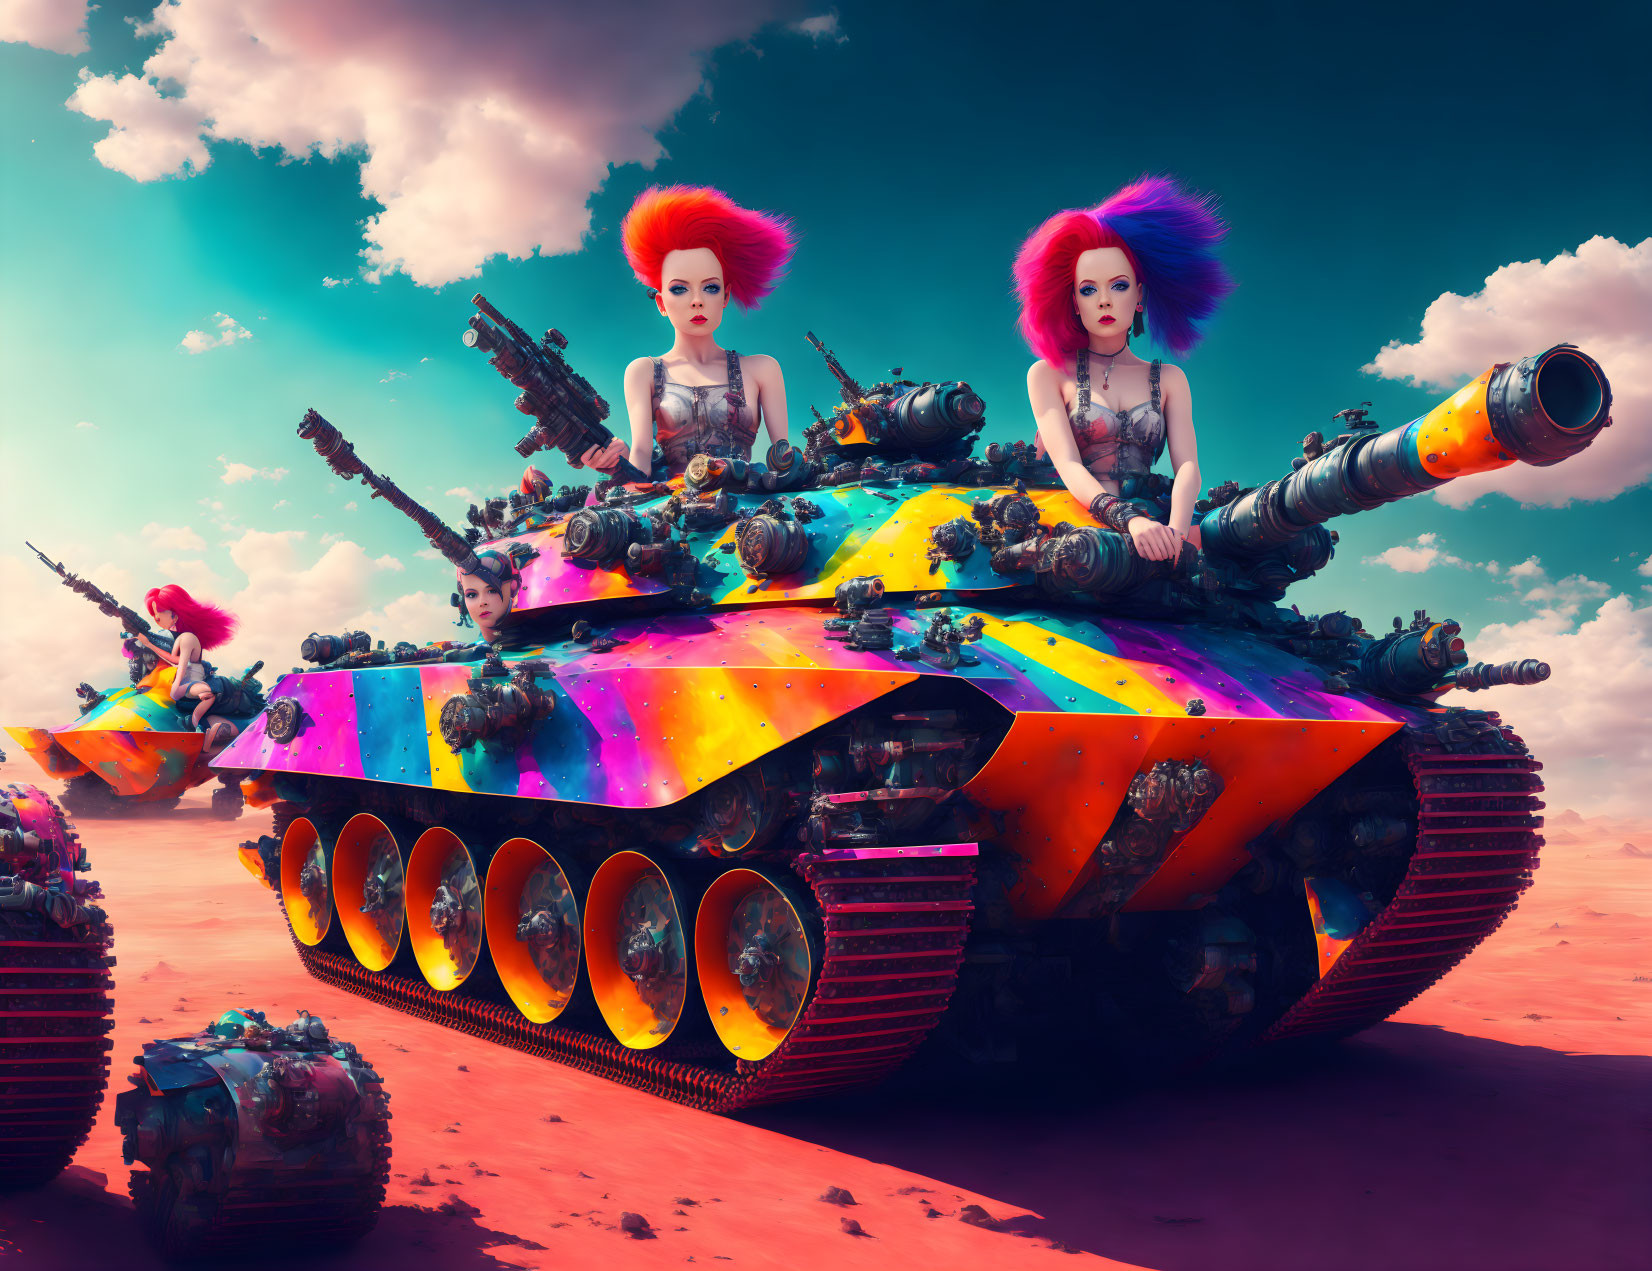 Colorful tanks with women in striking makeup and hairstyles on surreal battlefield